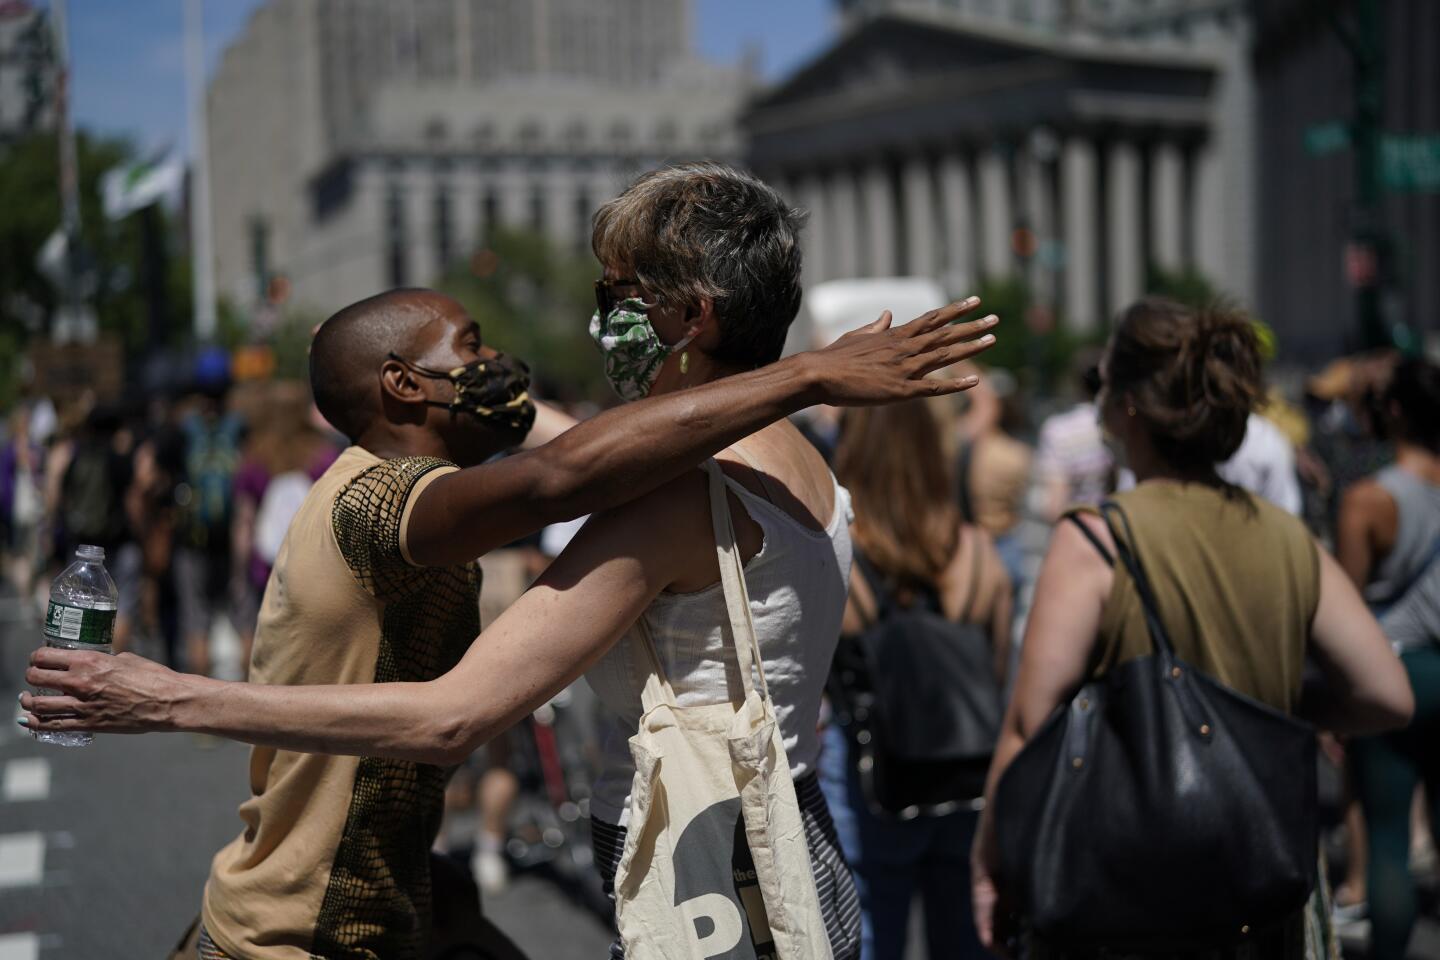 A man giving free hugs, left, embraces a protester at Foley Square during a Juneteenth rally in New York.